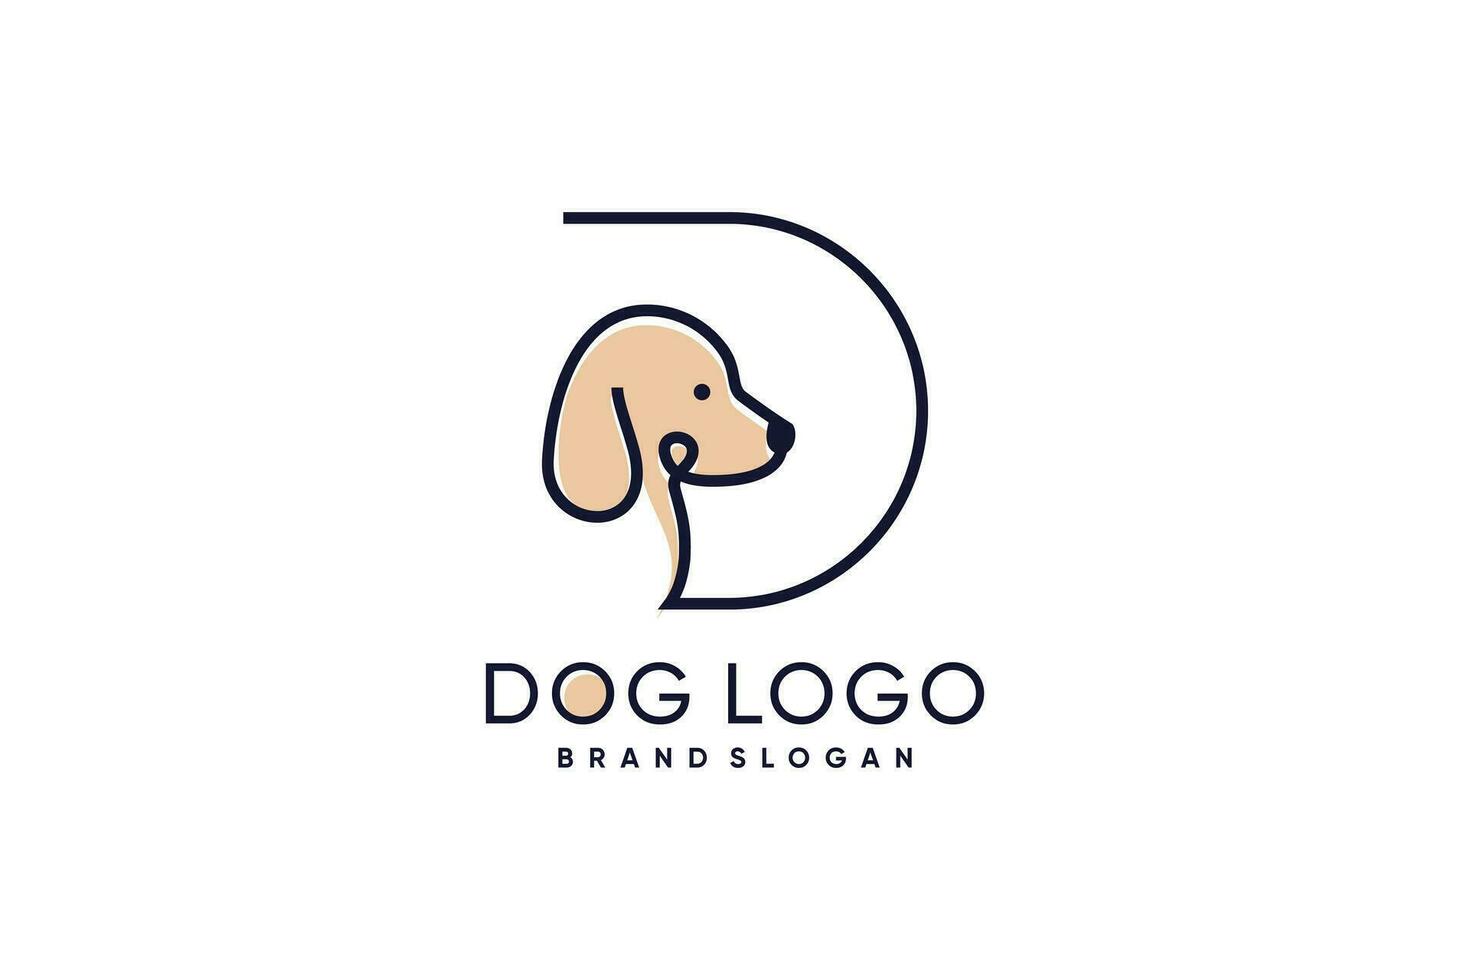 Dog logo design with creative letter D concept style vector